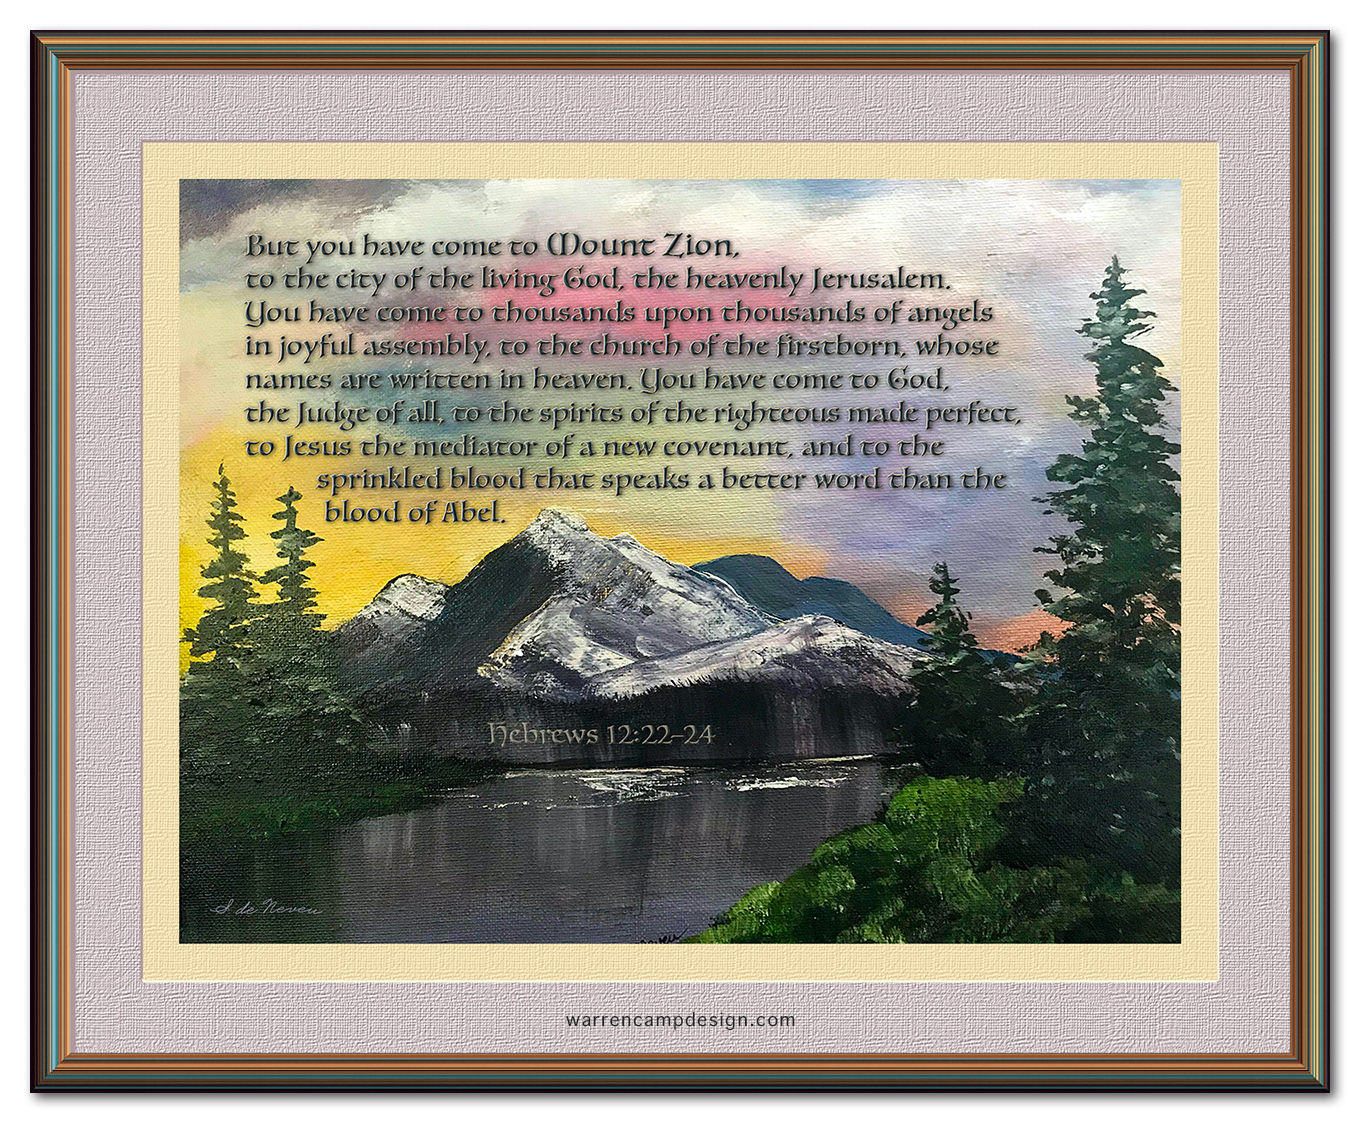 Scripture picture of Hebrews 12:22-24, emphasizing God's heavenly kingdom of Mount Zion